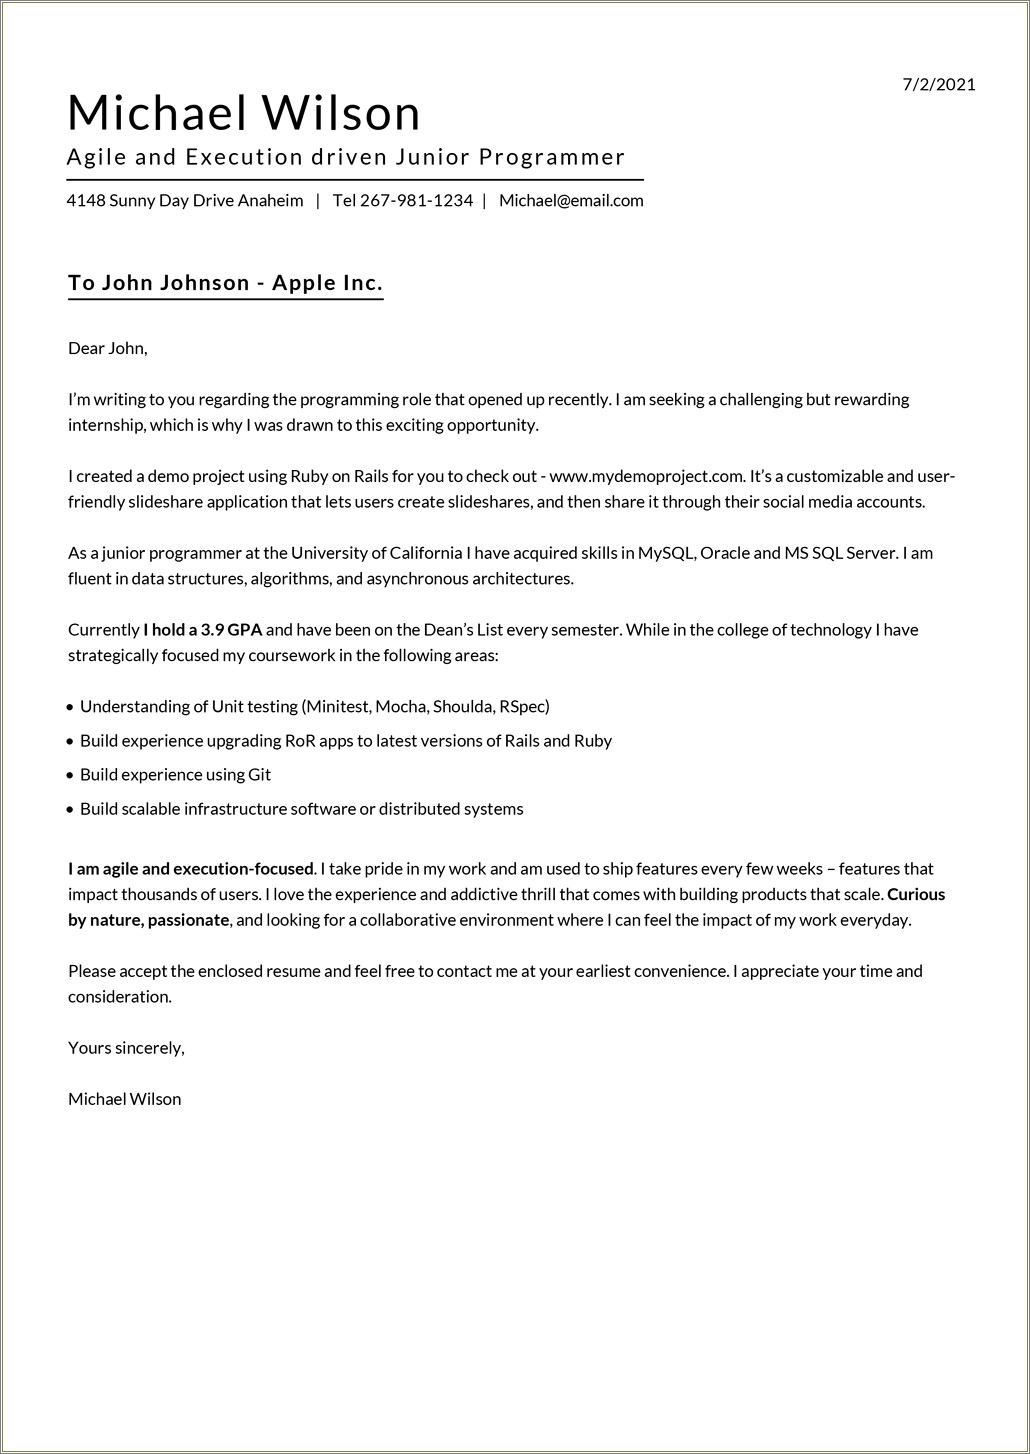 Example Of Resume Letter For Job Application